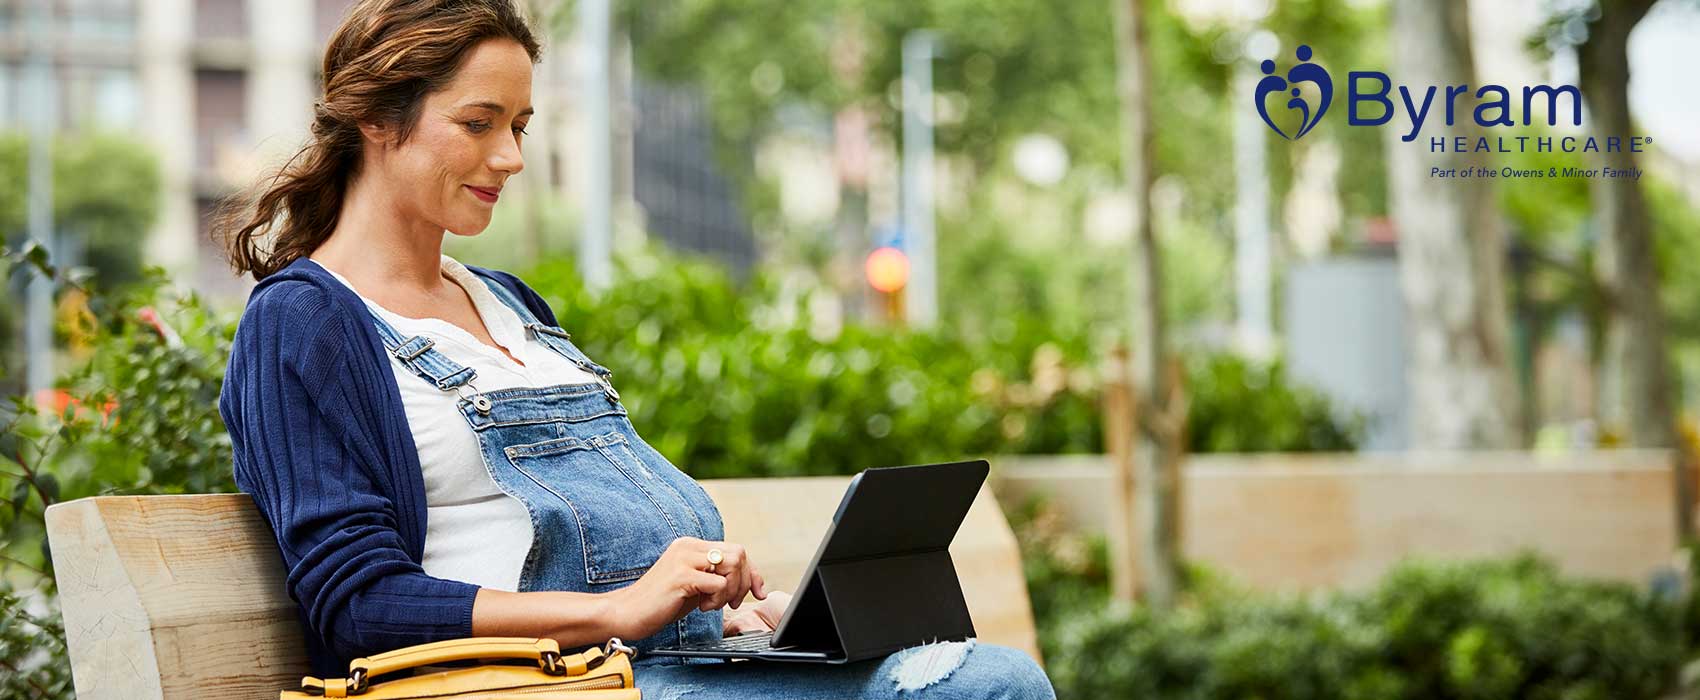 Pregnant lady sitting on a bench with her laptop.